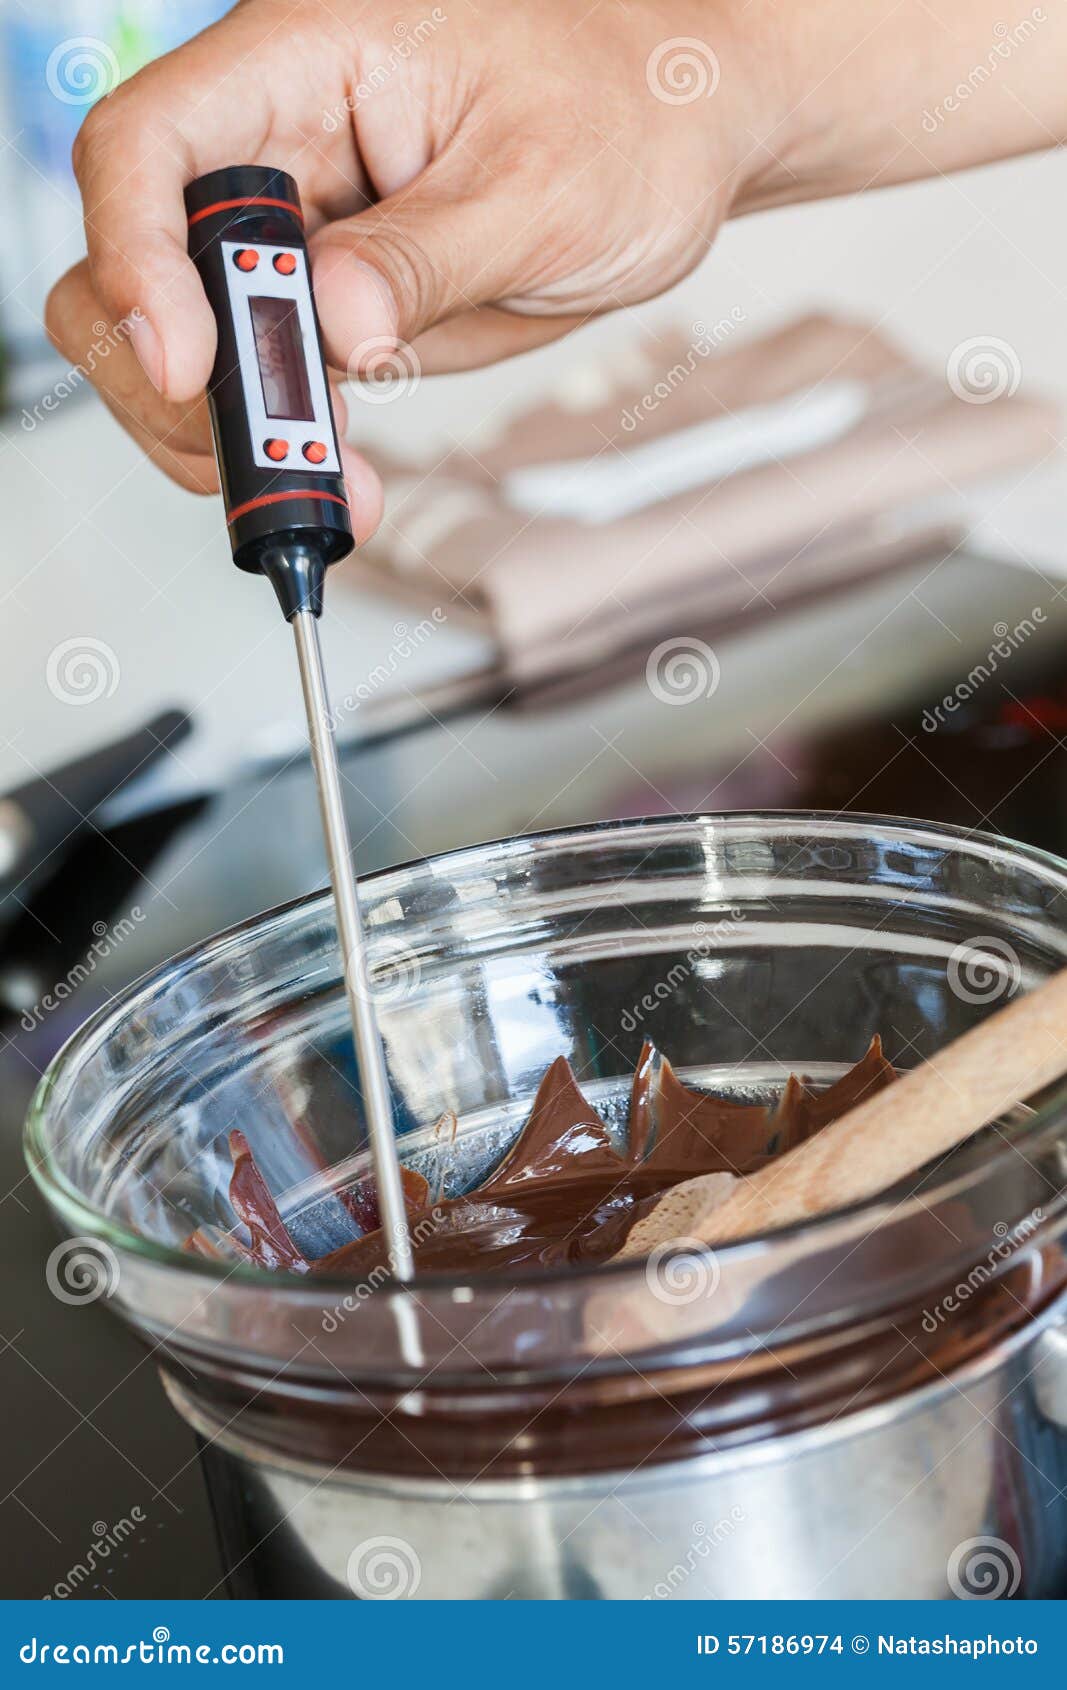 https://thumbs.dreamstime.com/z/tempering-chocolate-step-close-up-men-s-hand-measuring-temperature-kitchen-thermometer-57186974.jpg